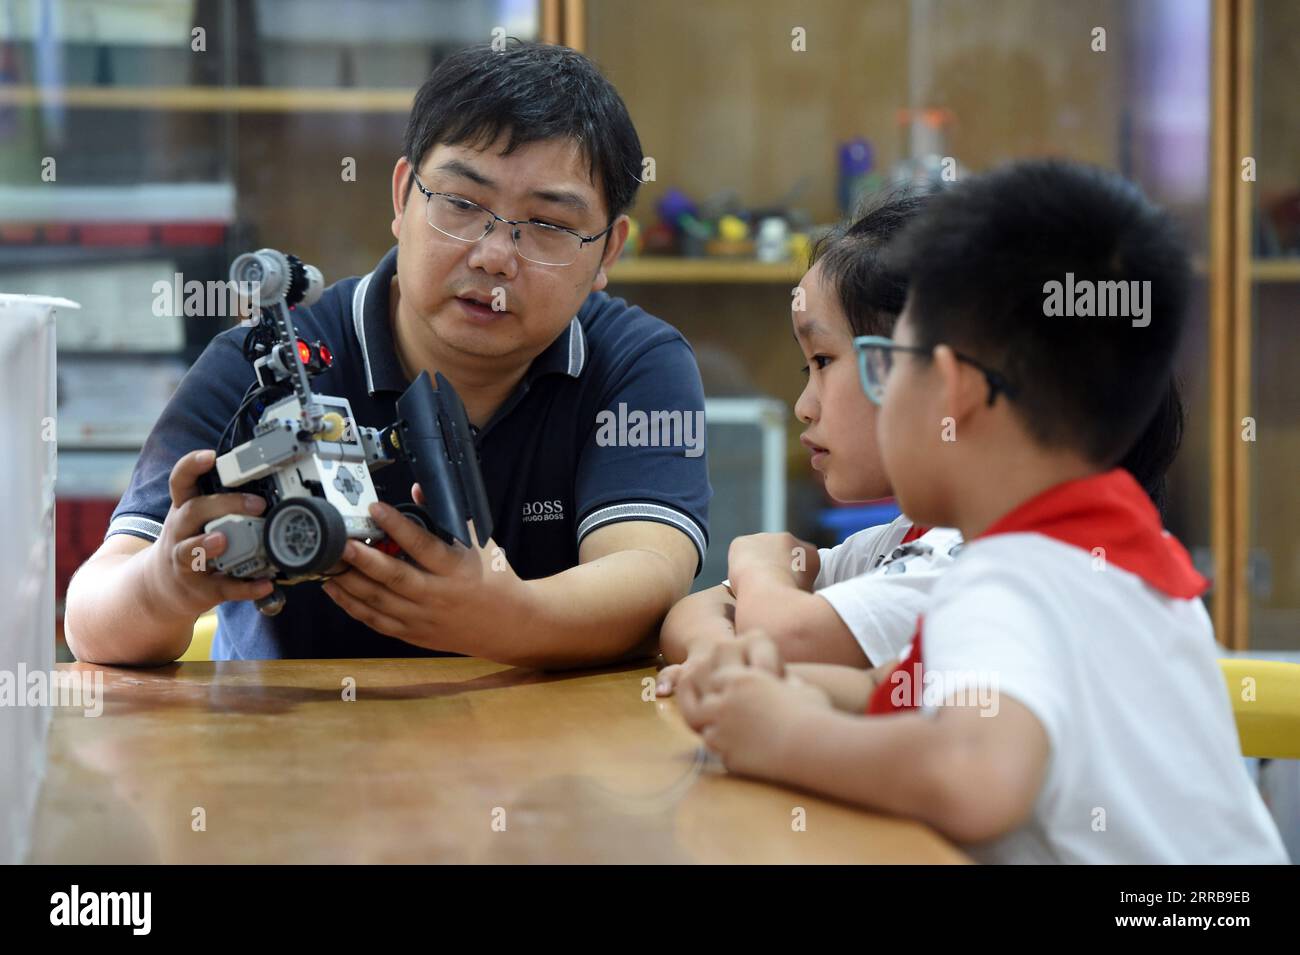 210909 -- HEFEI, Sept. 9, 2021 -- Yang Sen instructs his students at the robot club at Heping Primary School in Hefei City, east China s Anhui Province, Sept. 8, 2021. Yang Sen, a computer teacher from Heping Primary School, has interest in graphical language applied to robots in his spare time. After class, he organizes a robot club instructing his students to explore the use of multiple sensors and various scientific principles.  CHINA-ANHUI-HEFEI-AFTER-SCHOOL ACTIVITY CN ZhouxMu PUBLICATIONxNOTxINxCHN Stock Photo